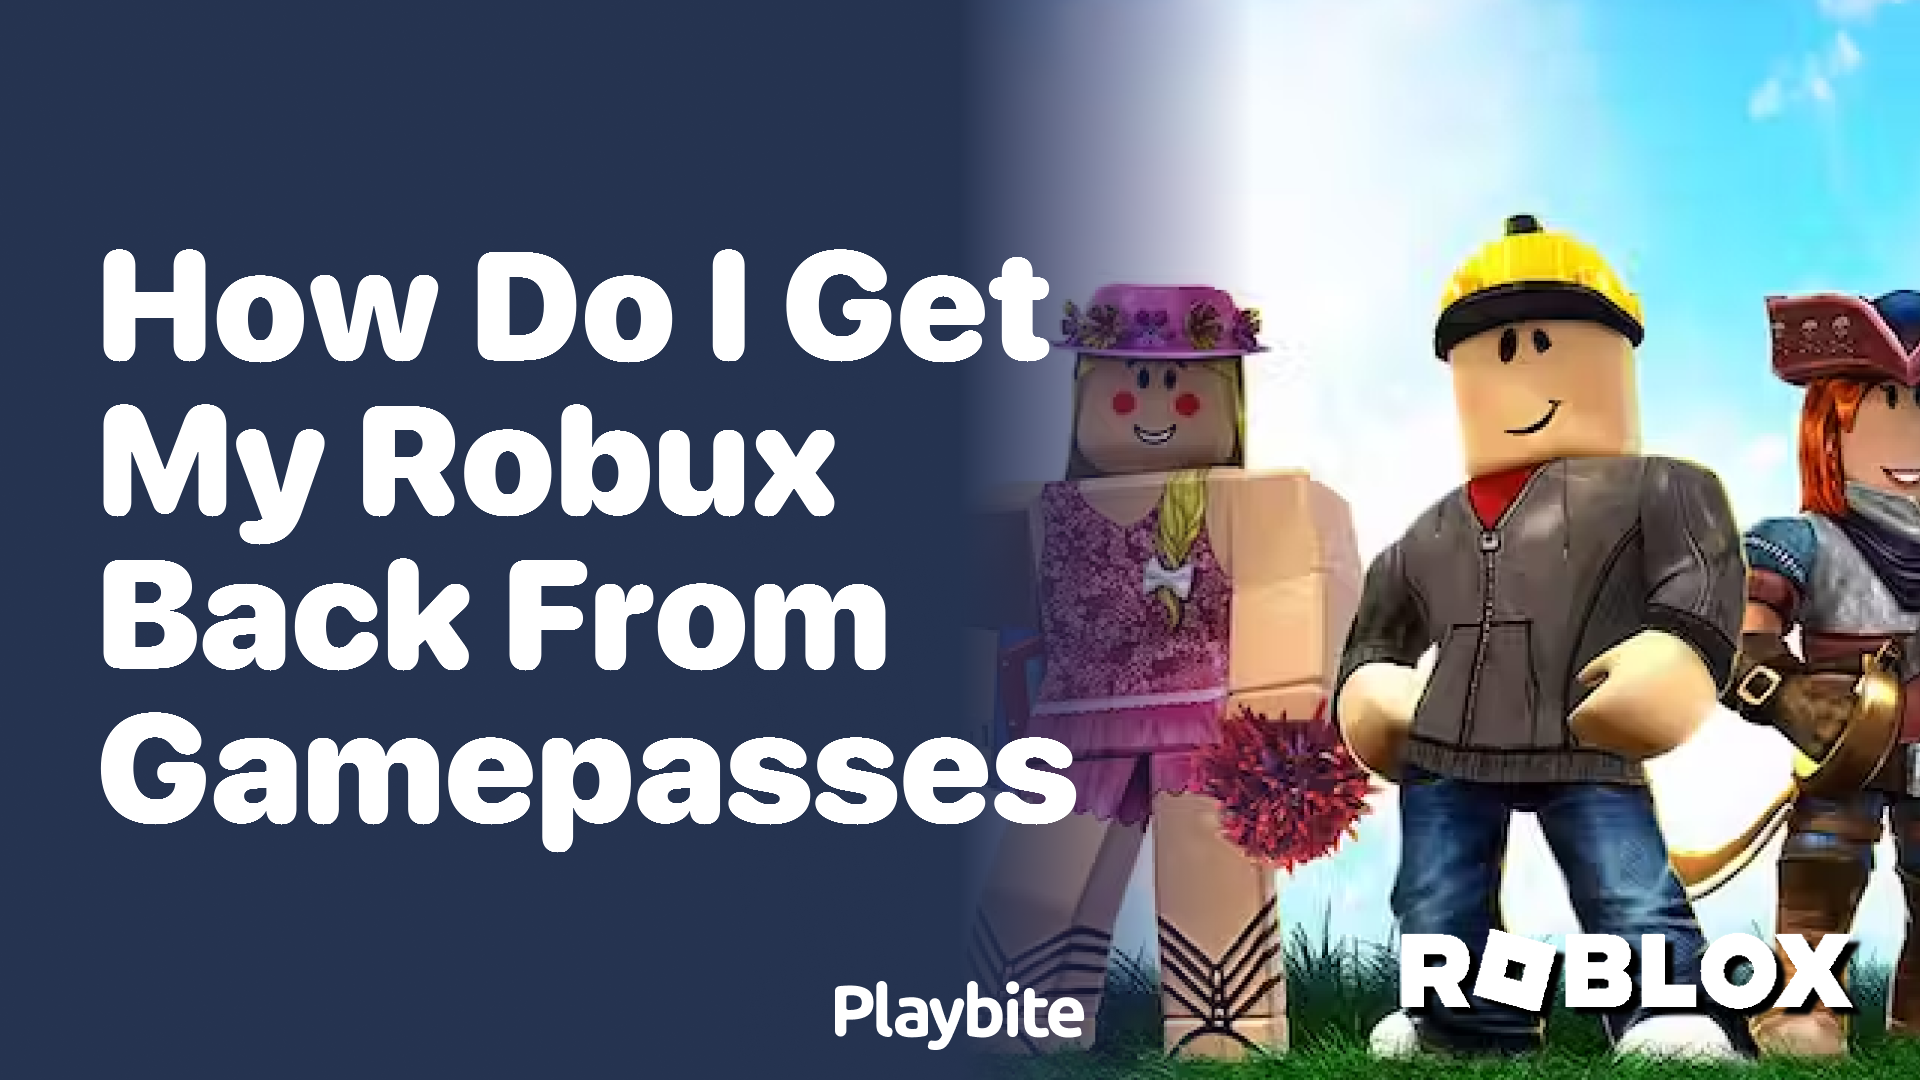 How Do I Get My Robux Back from Game Passes?